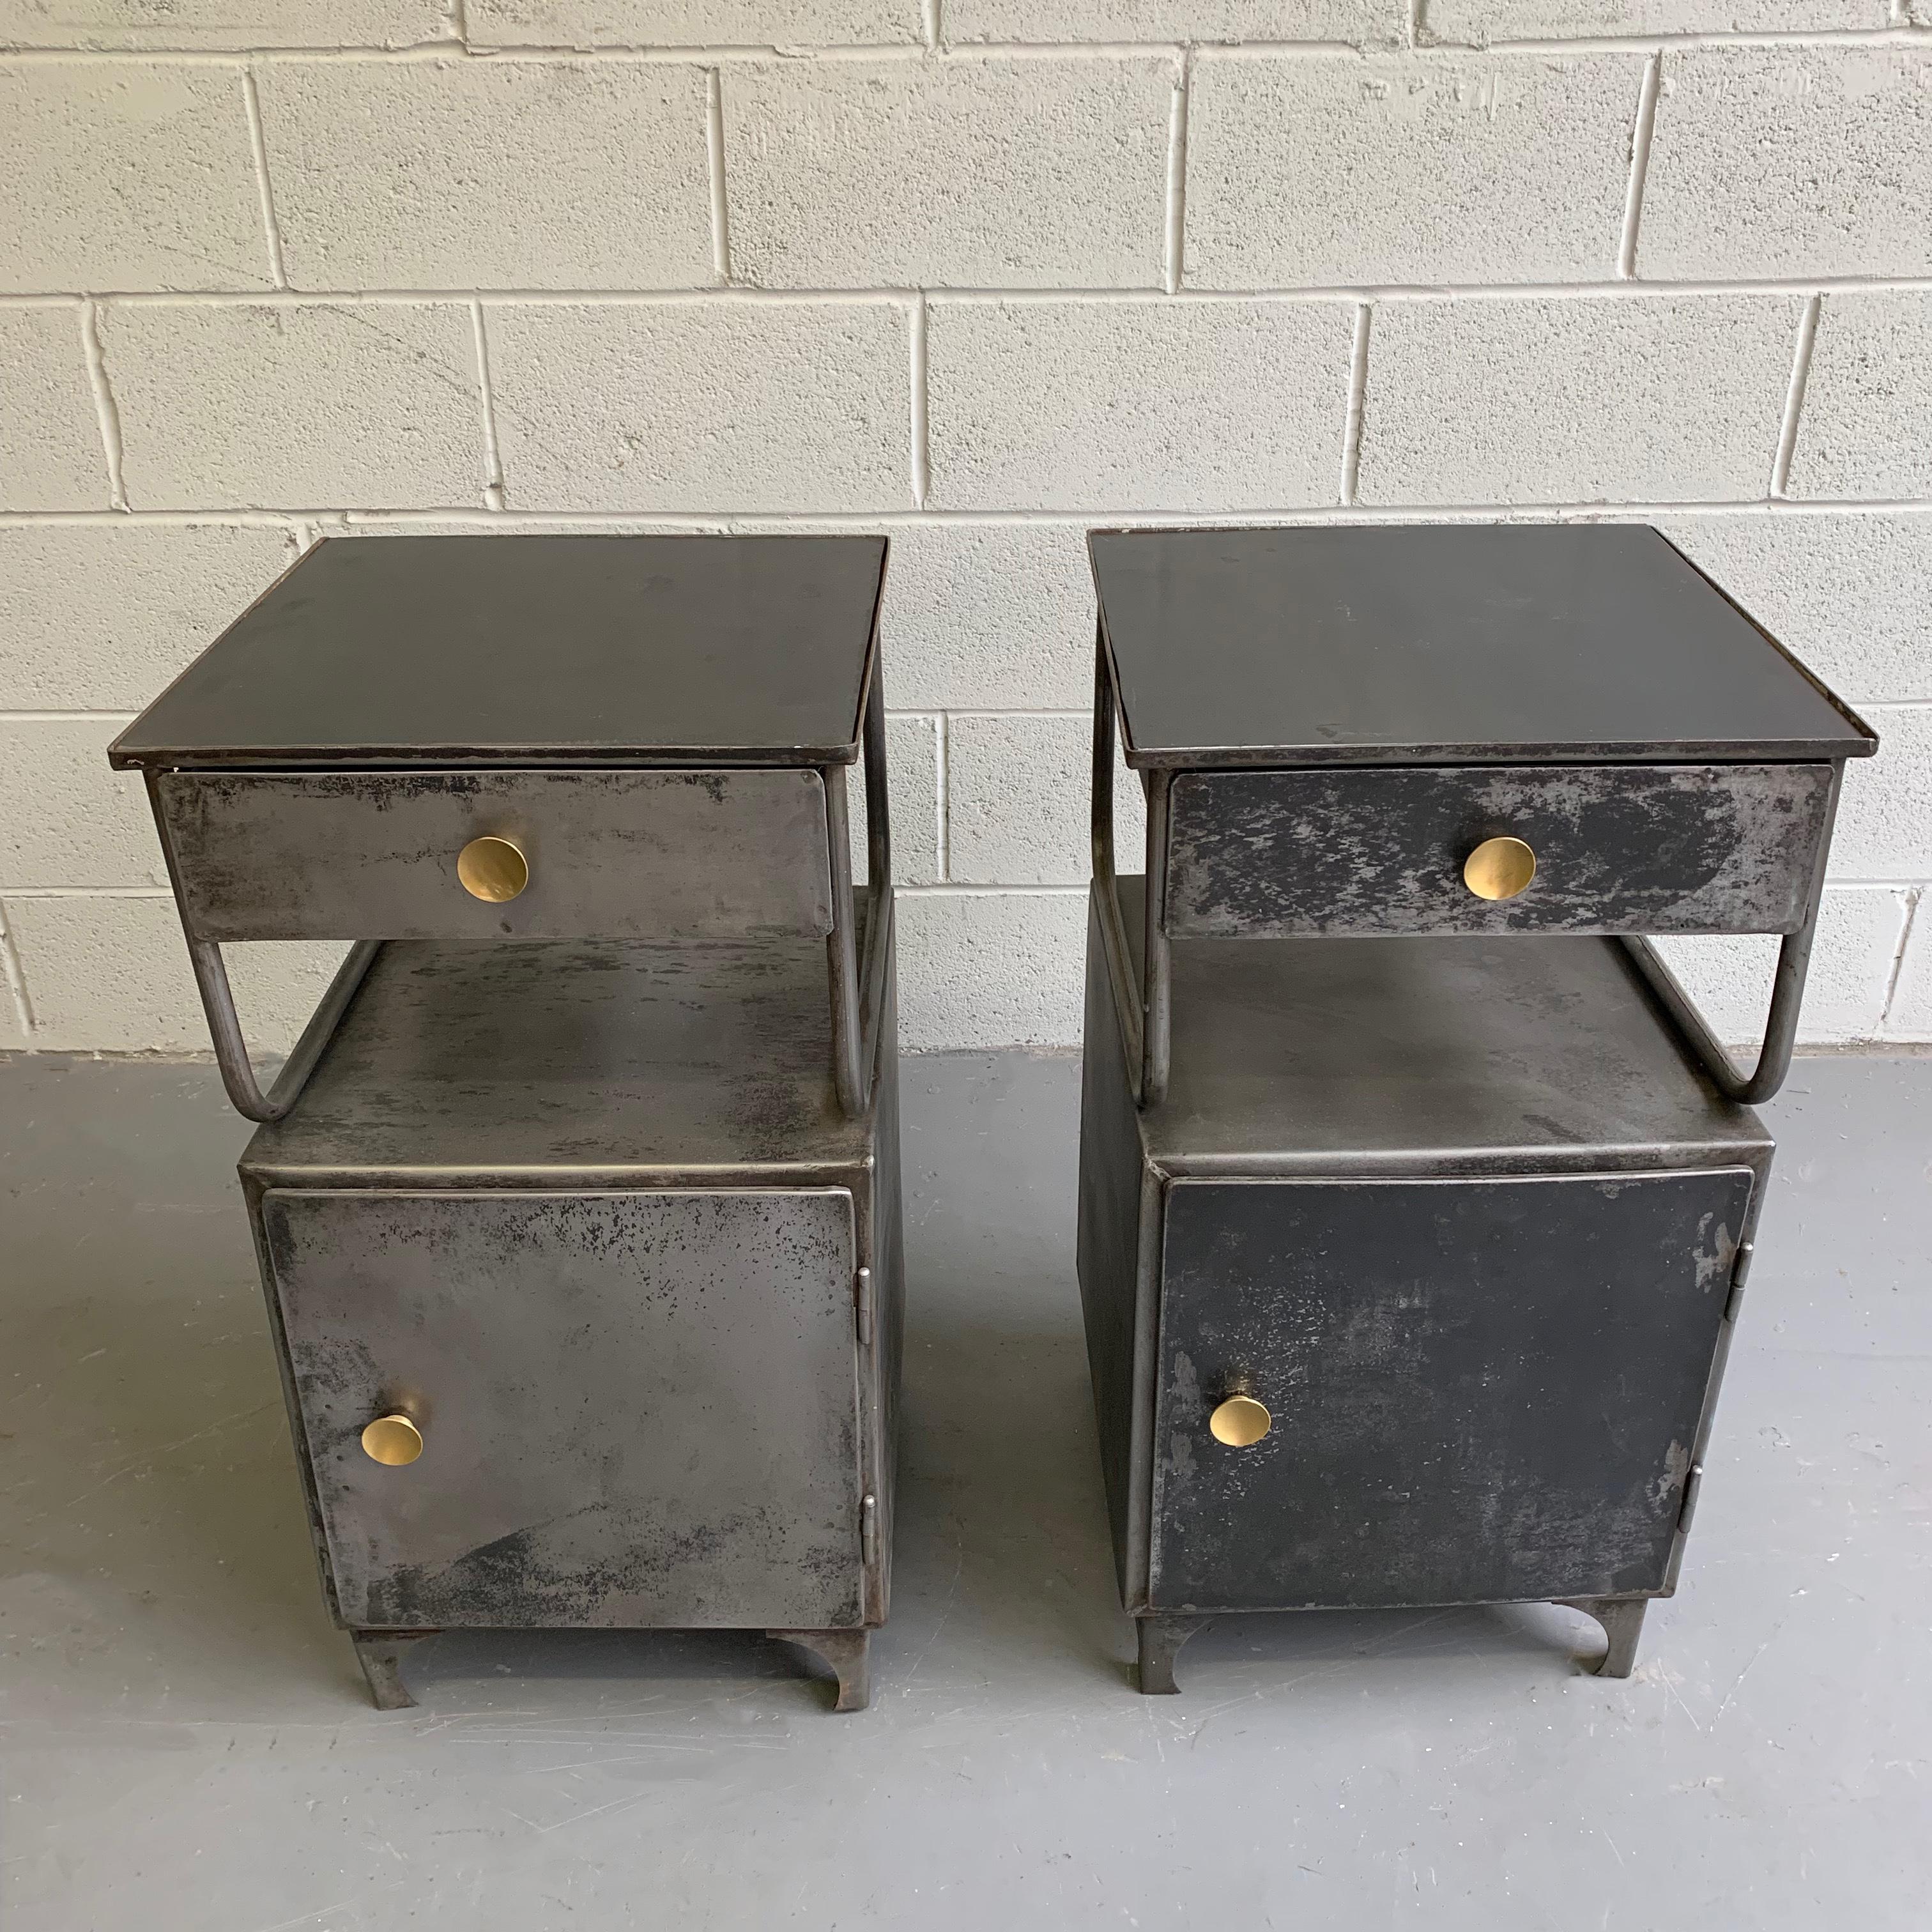 20th Century Industrial Brushed Steel Hospital Nightstand Cabinets